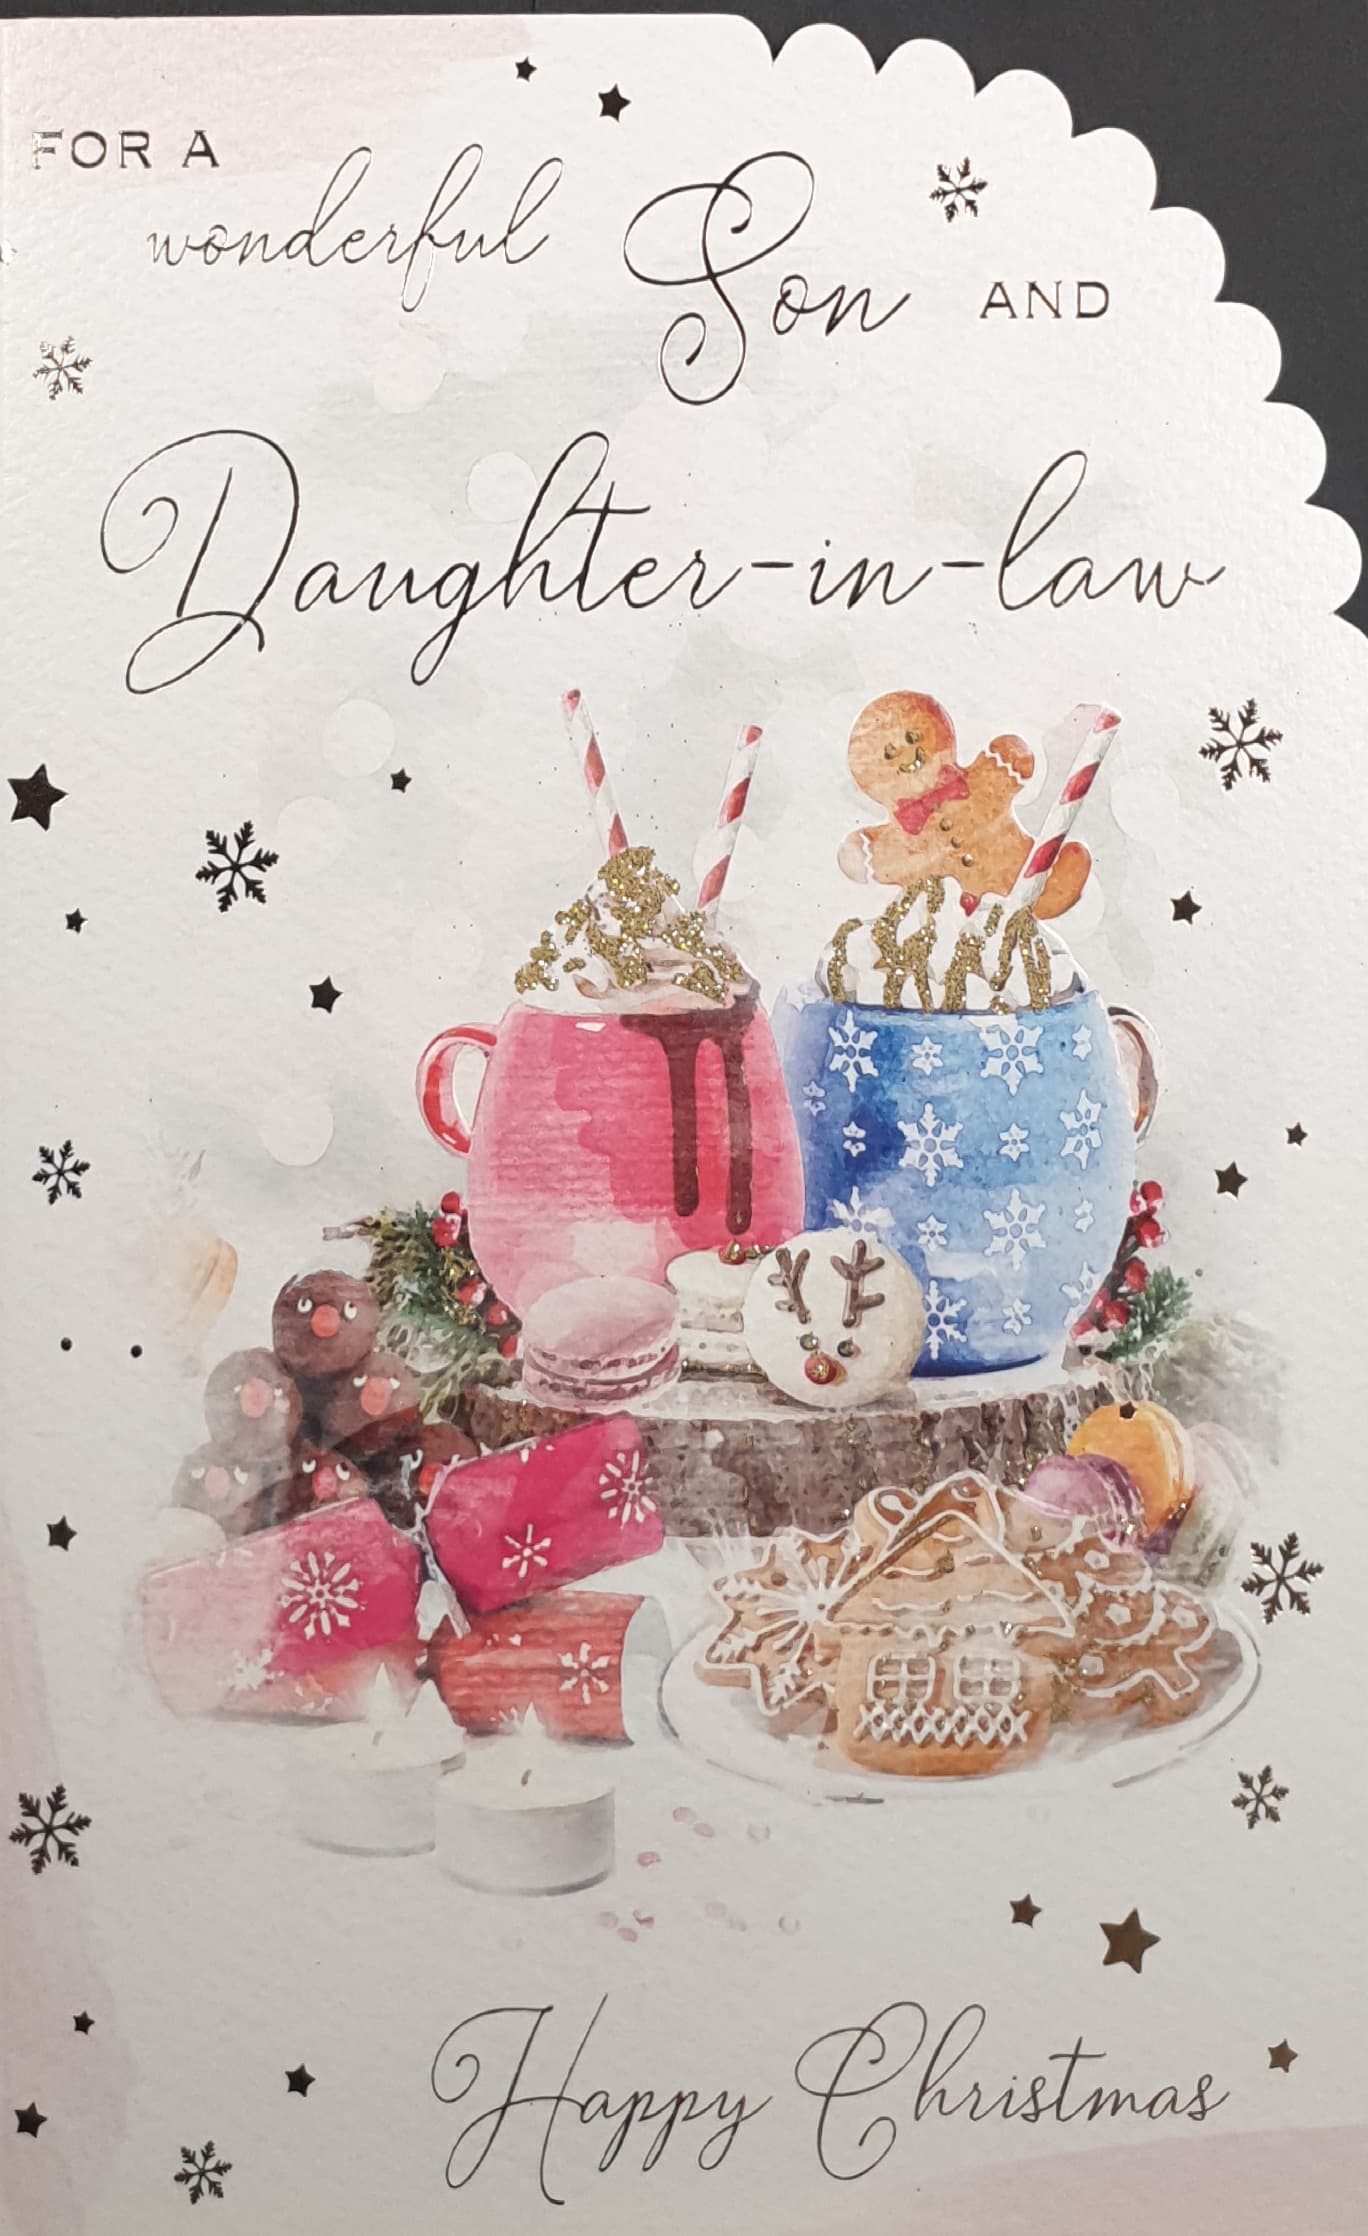 Son & Daughter in Law Christmas Card - Christmas Hot Chocolate & Cookies